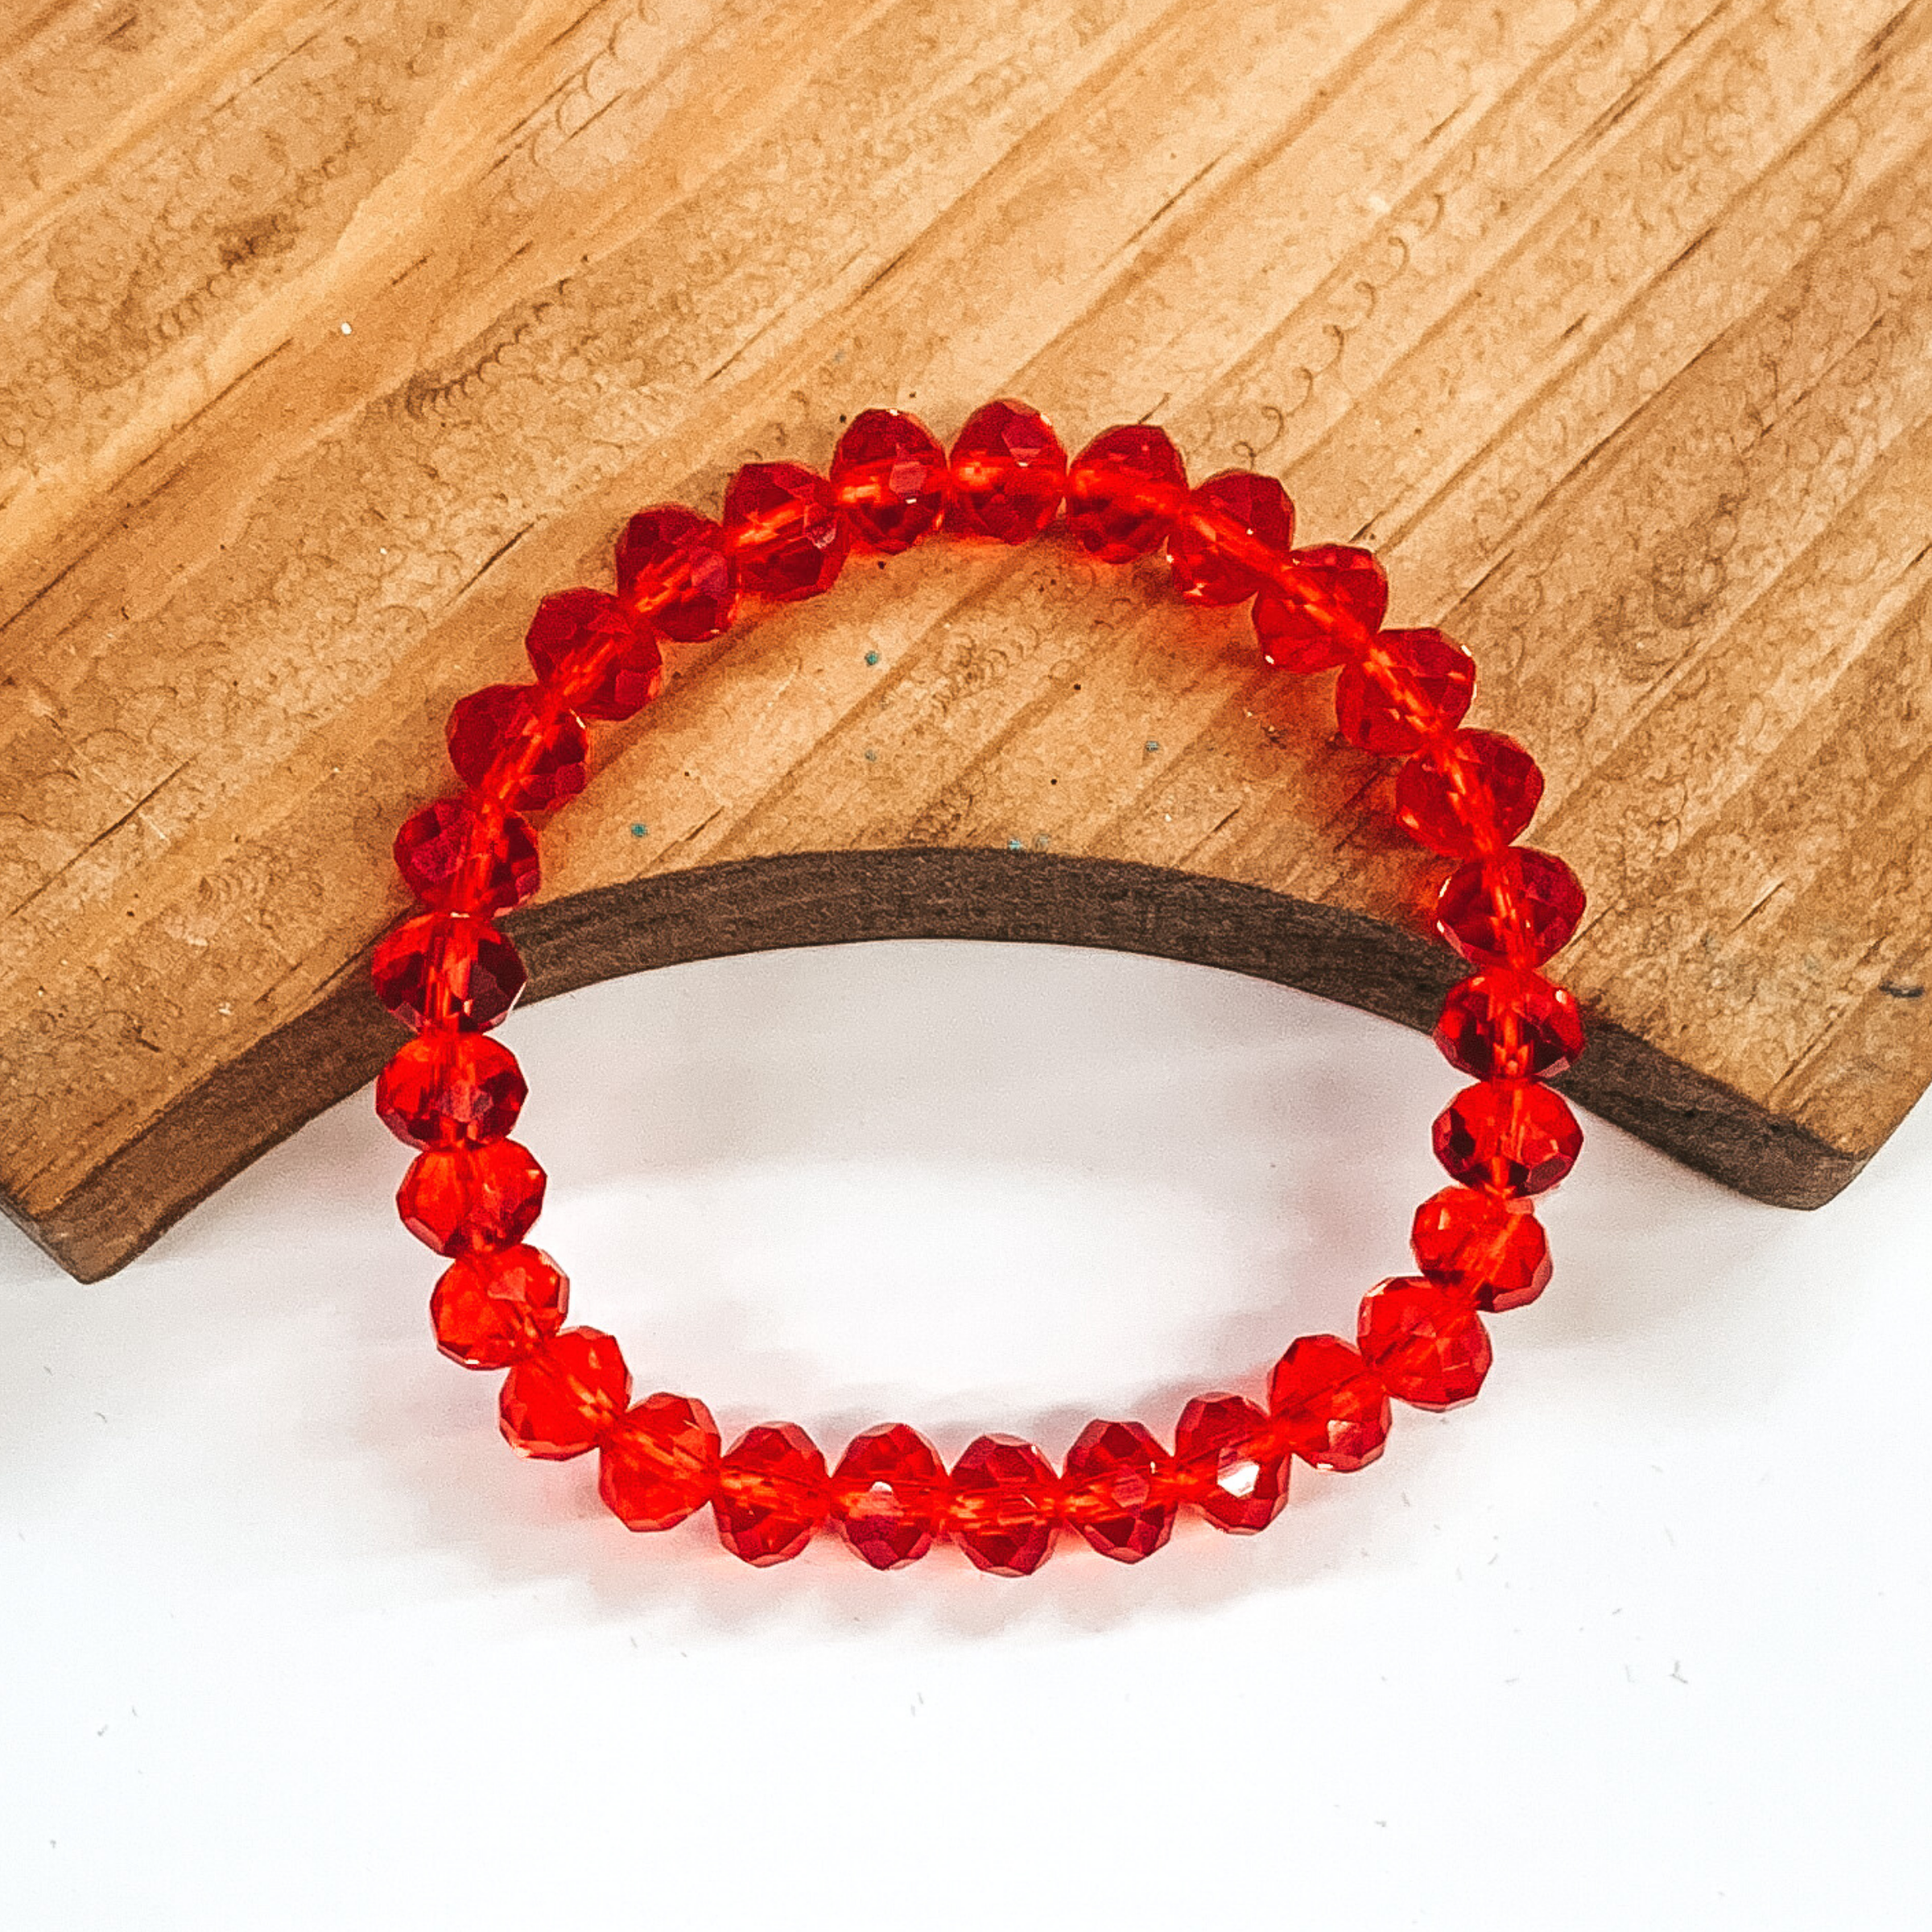 Red crystal beaded bracelet. This bracelet is pictured laying partially on a brown block on a white background.